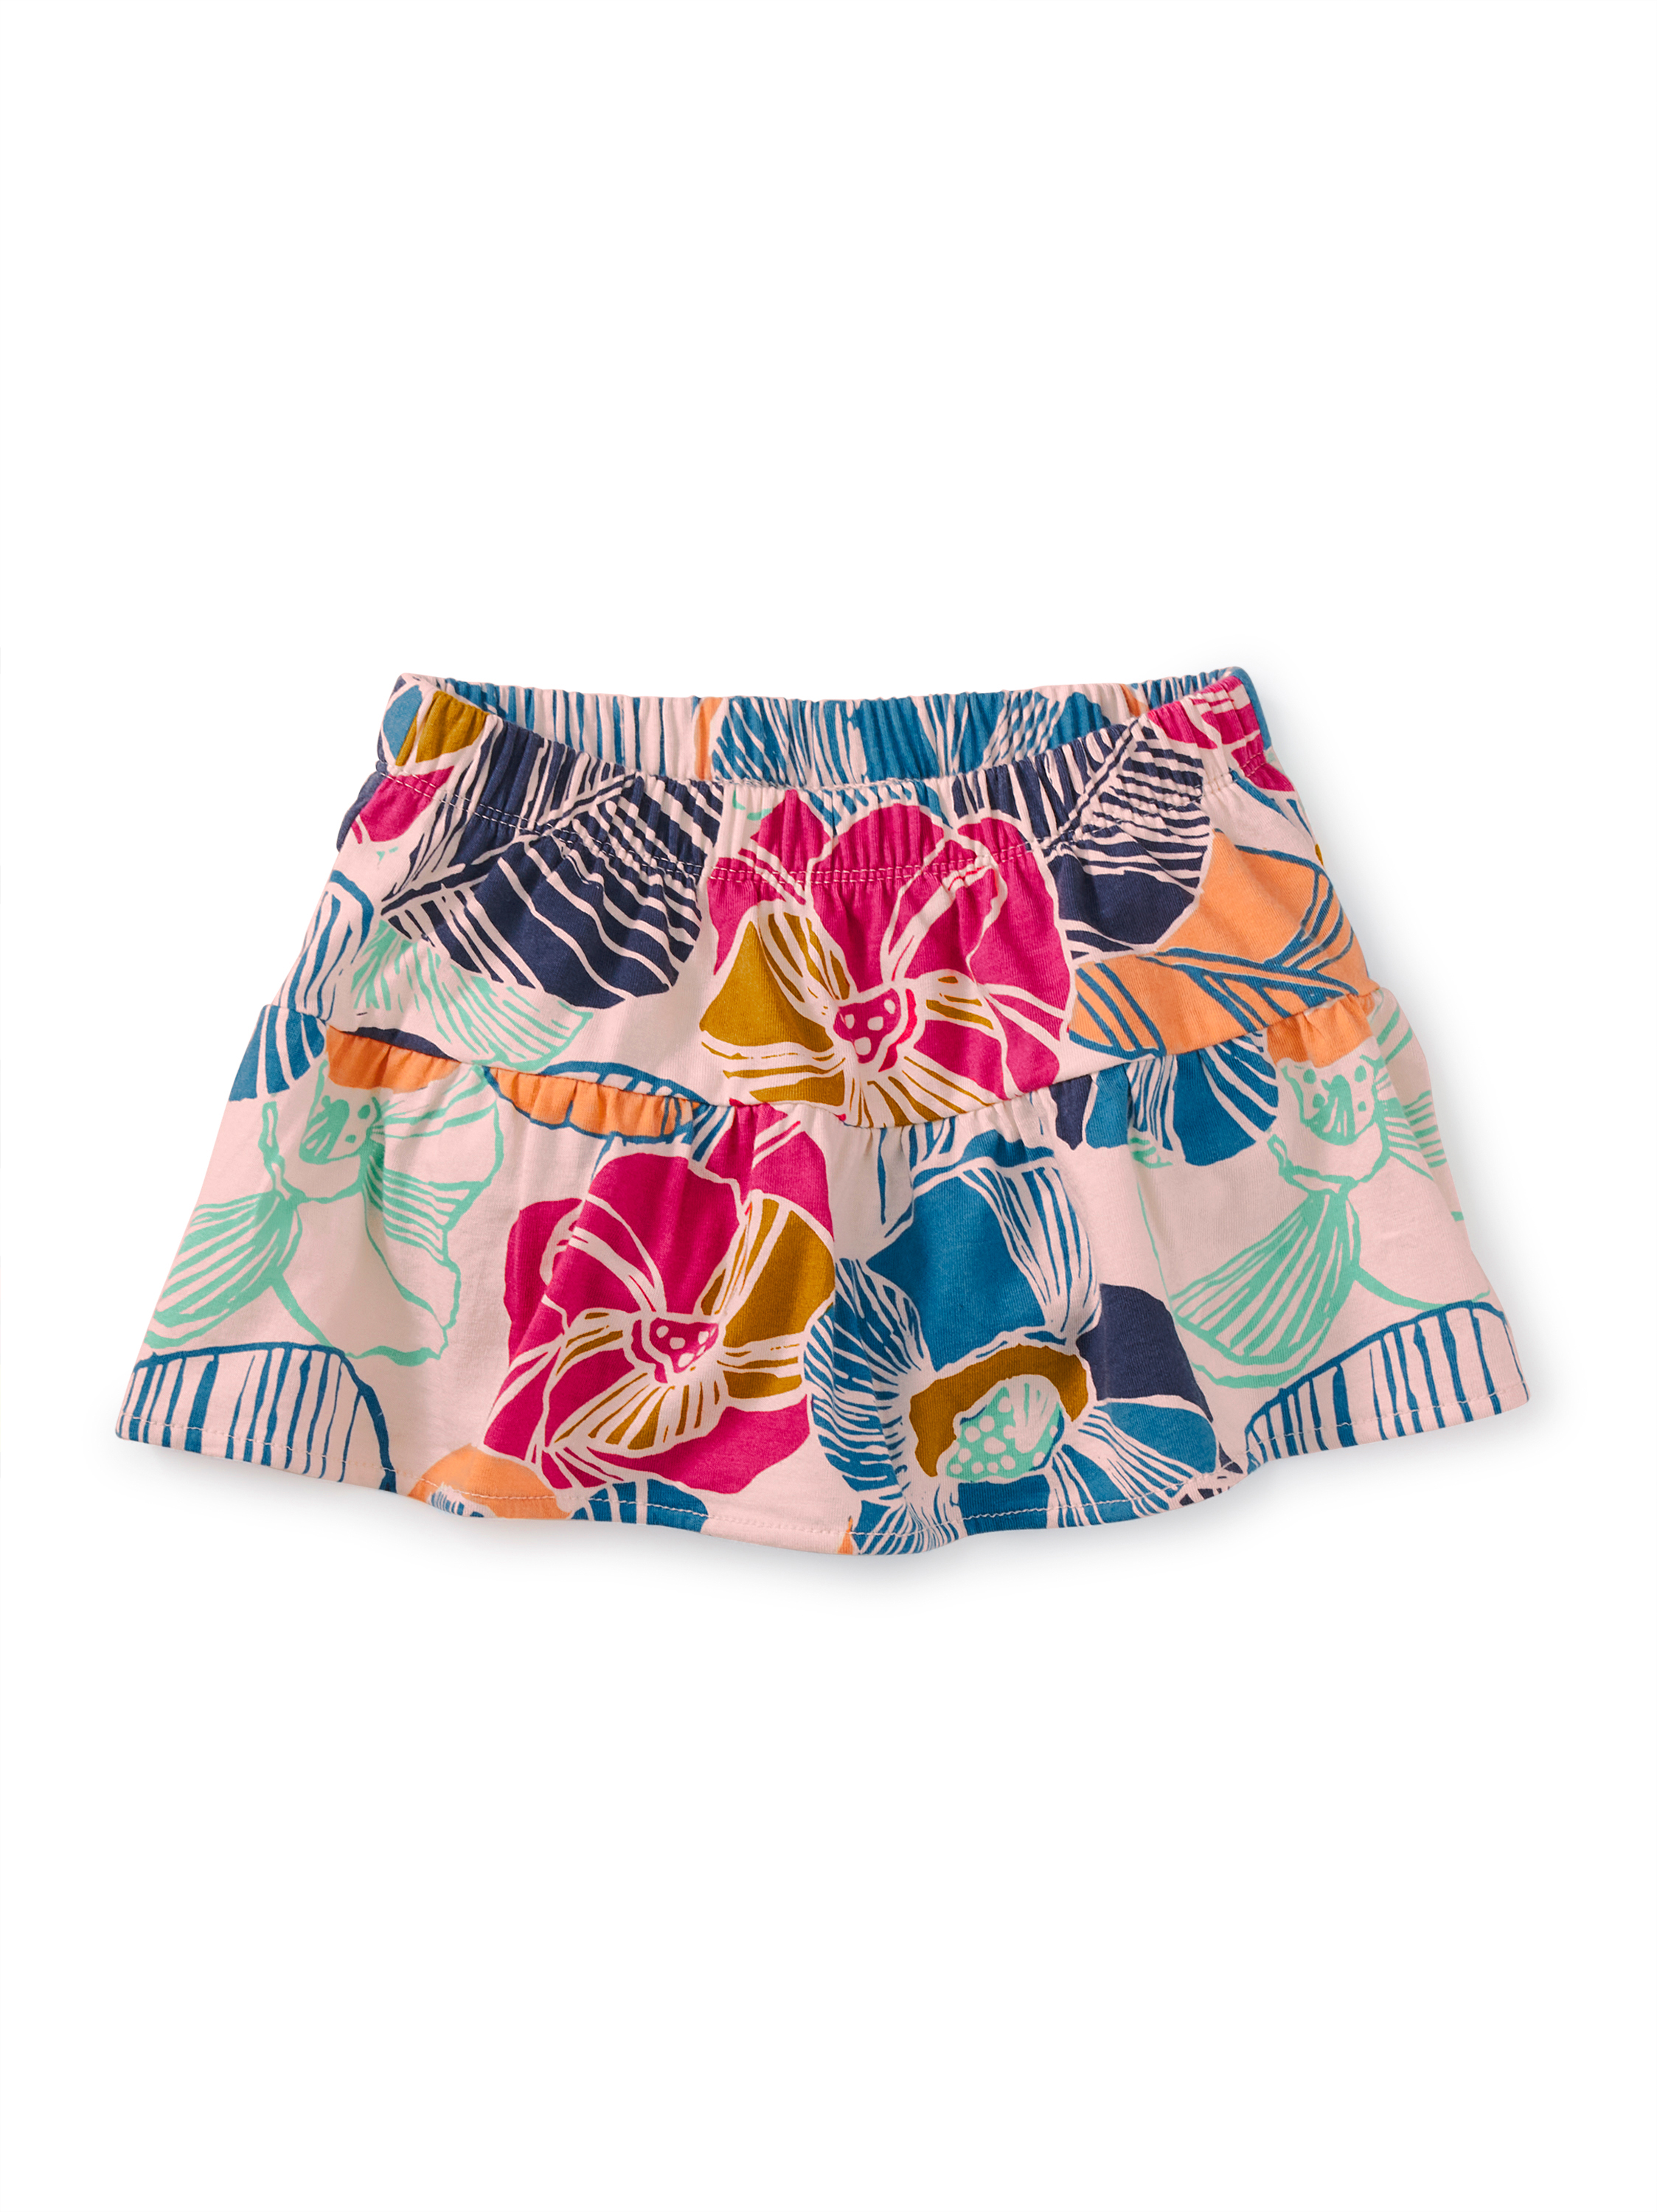 Ruffled Baby Bloomers | Tea Collection